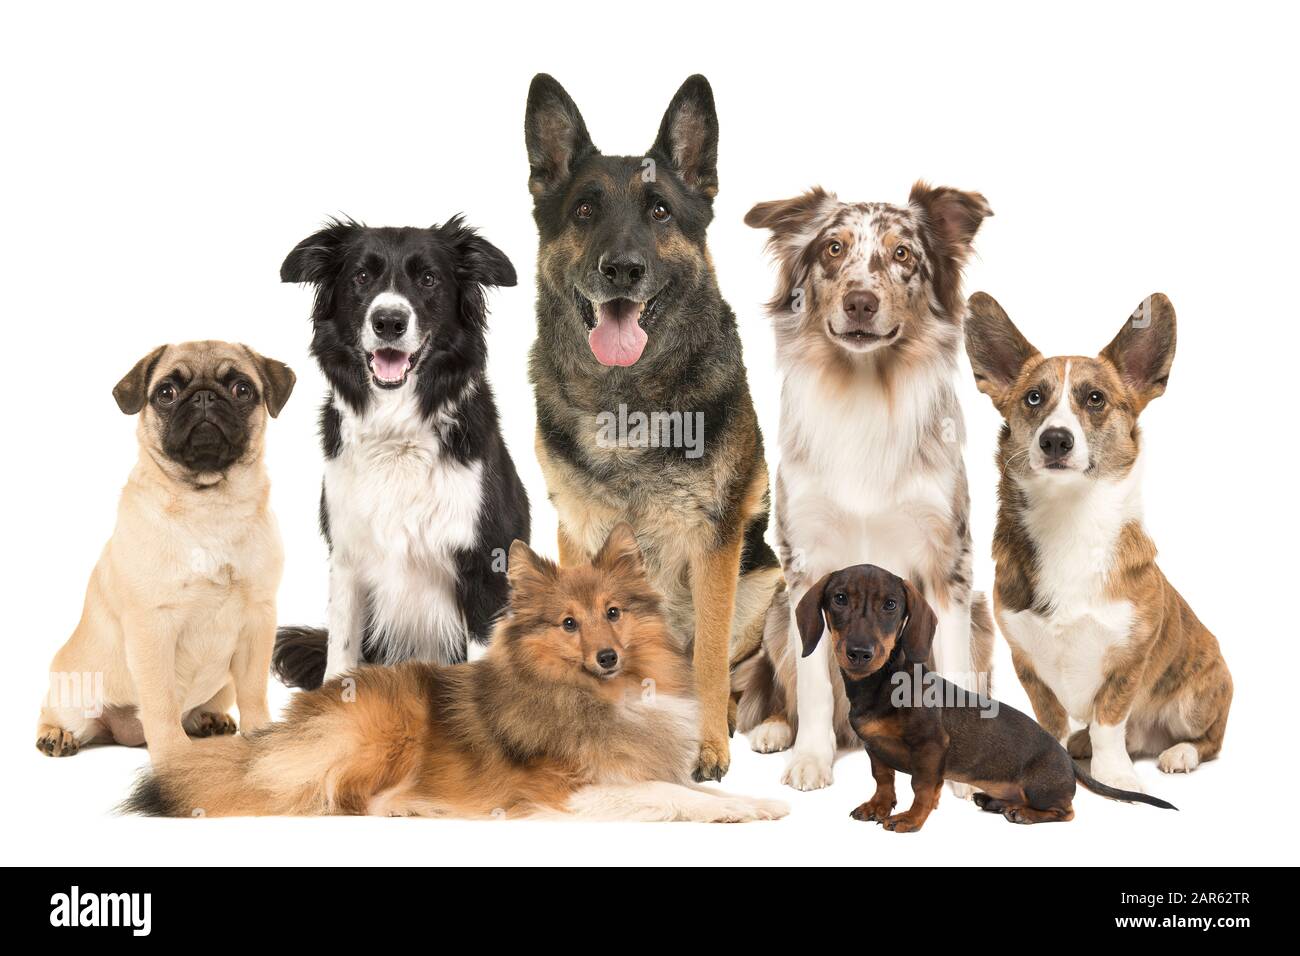 Large group of various breeds of dogs together on a white background Stock Photo